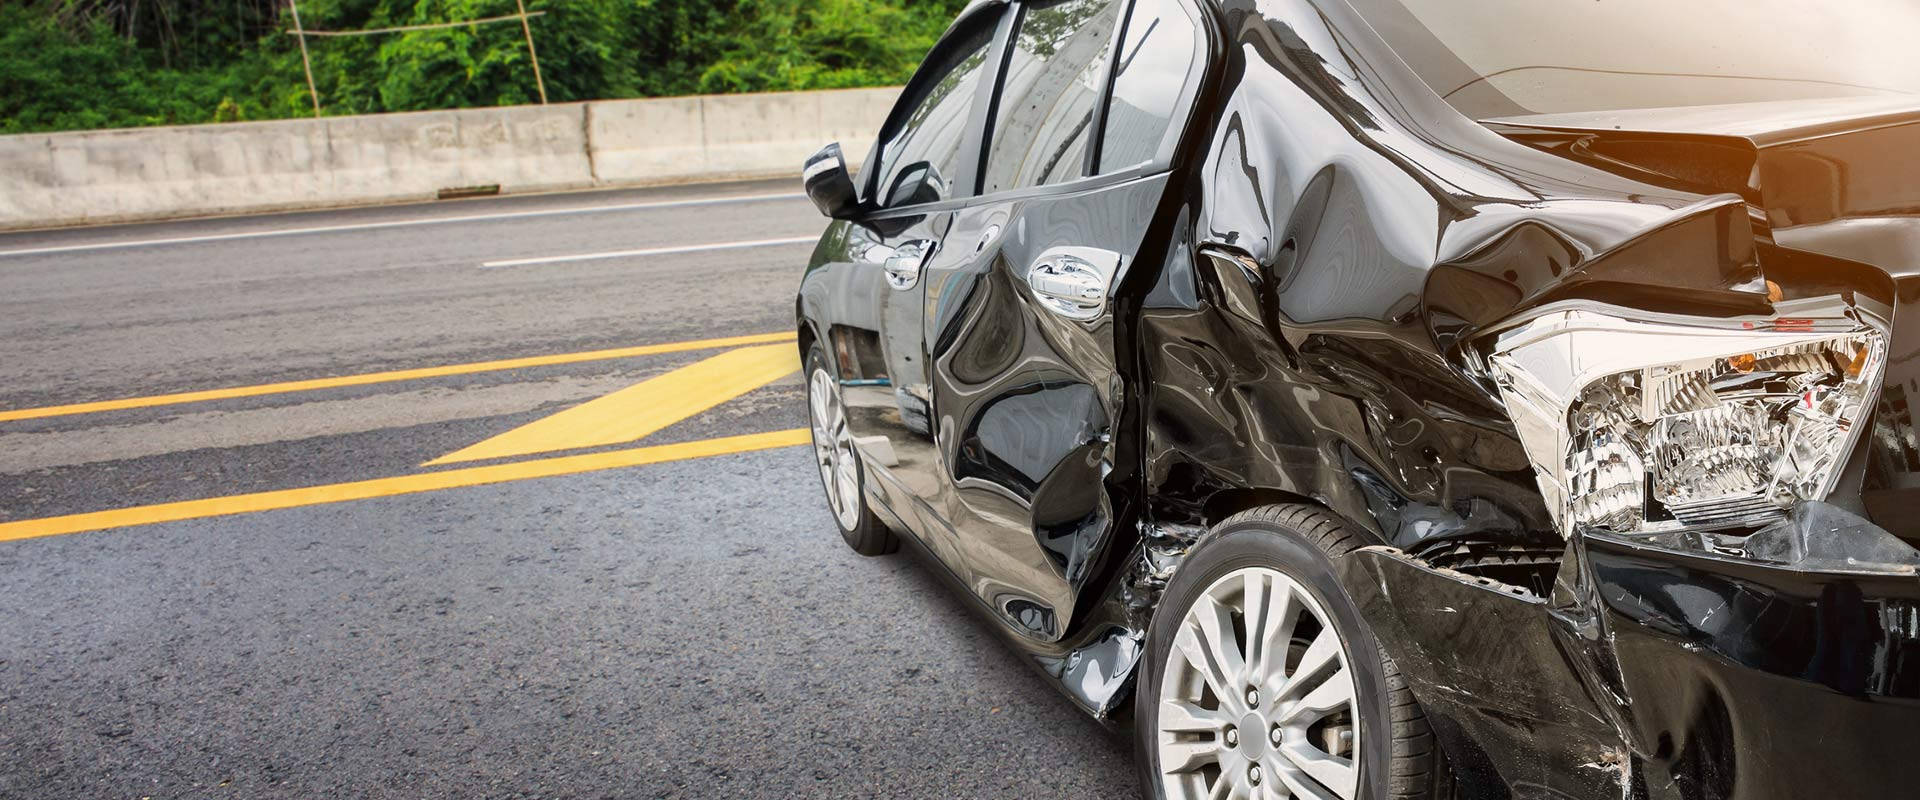 Dented Car Accident Wallpaper